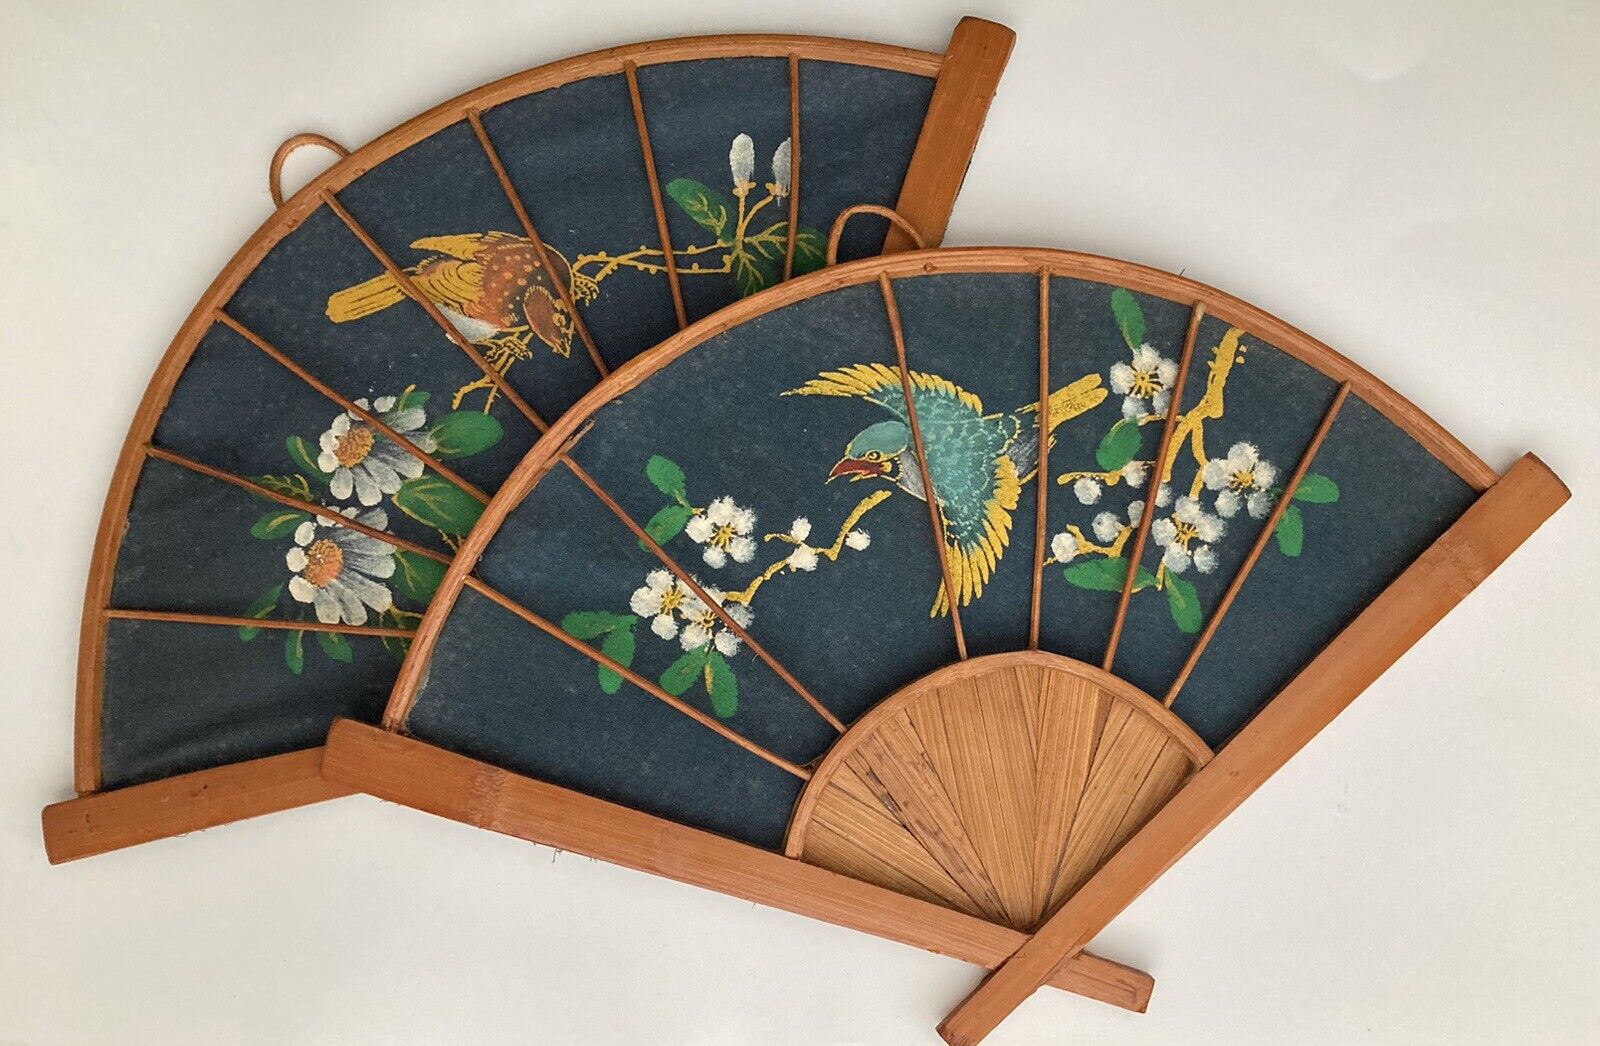 Vintage Japanese Bamboo Fans Hand Painted Bird On Fabric Wall Hanging Decor Pair